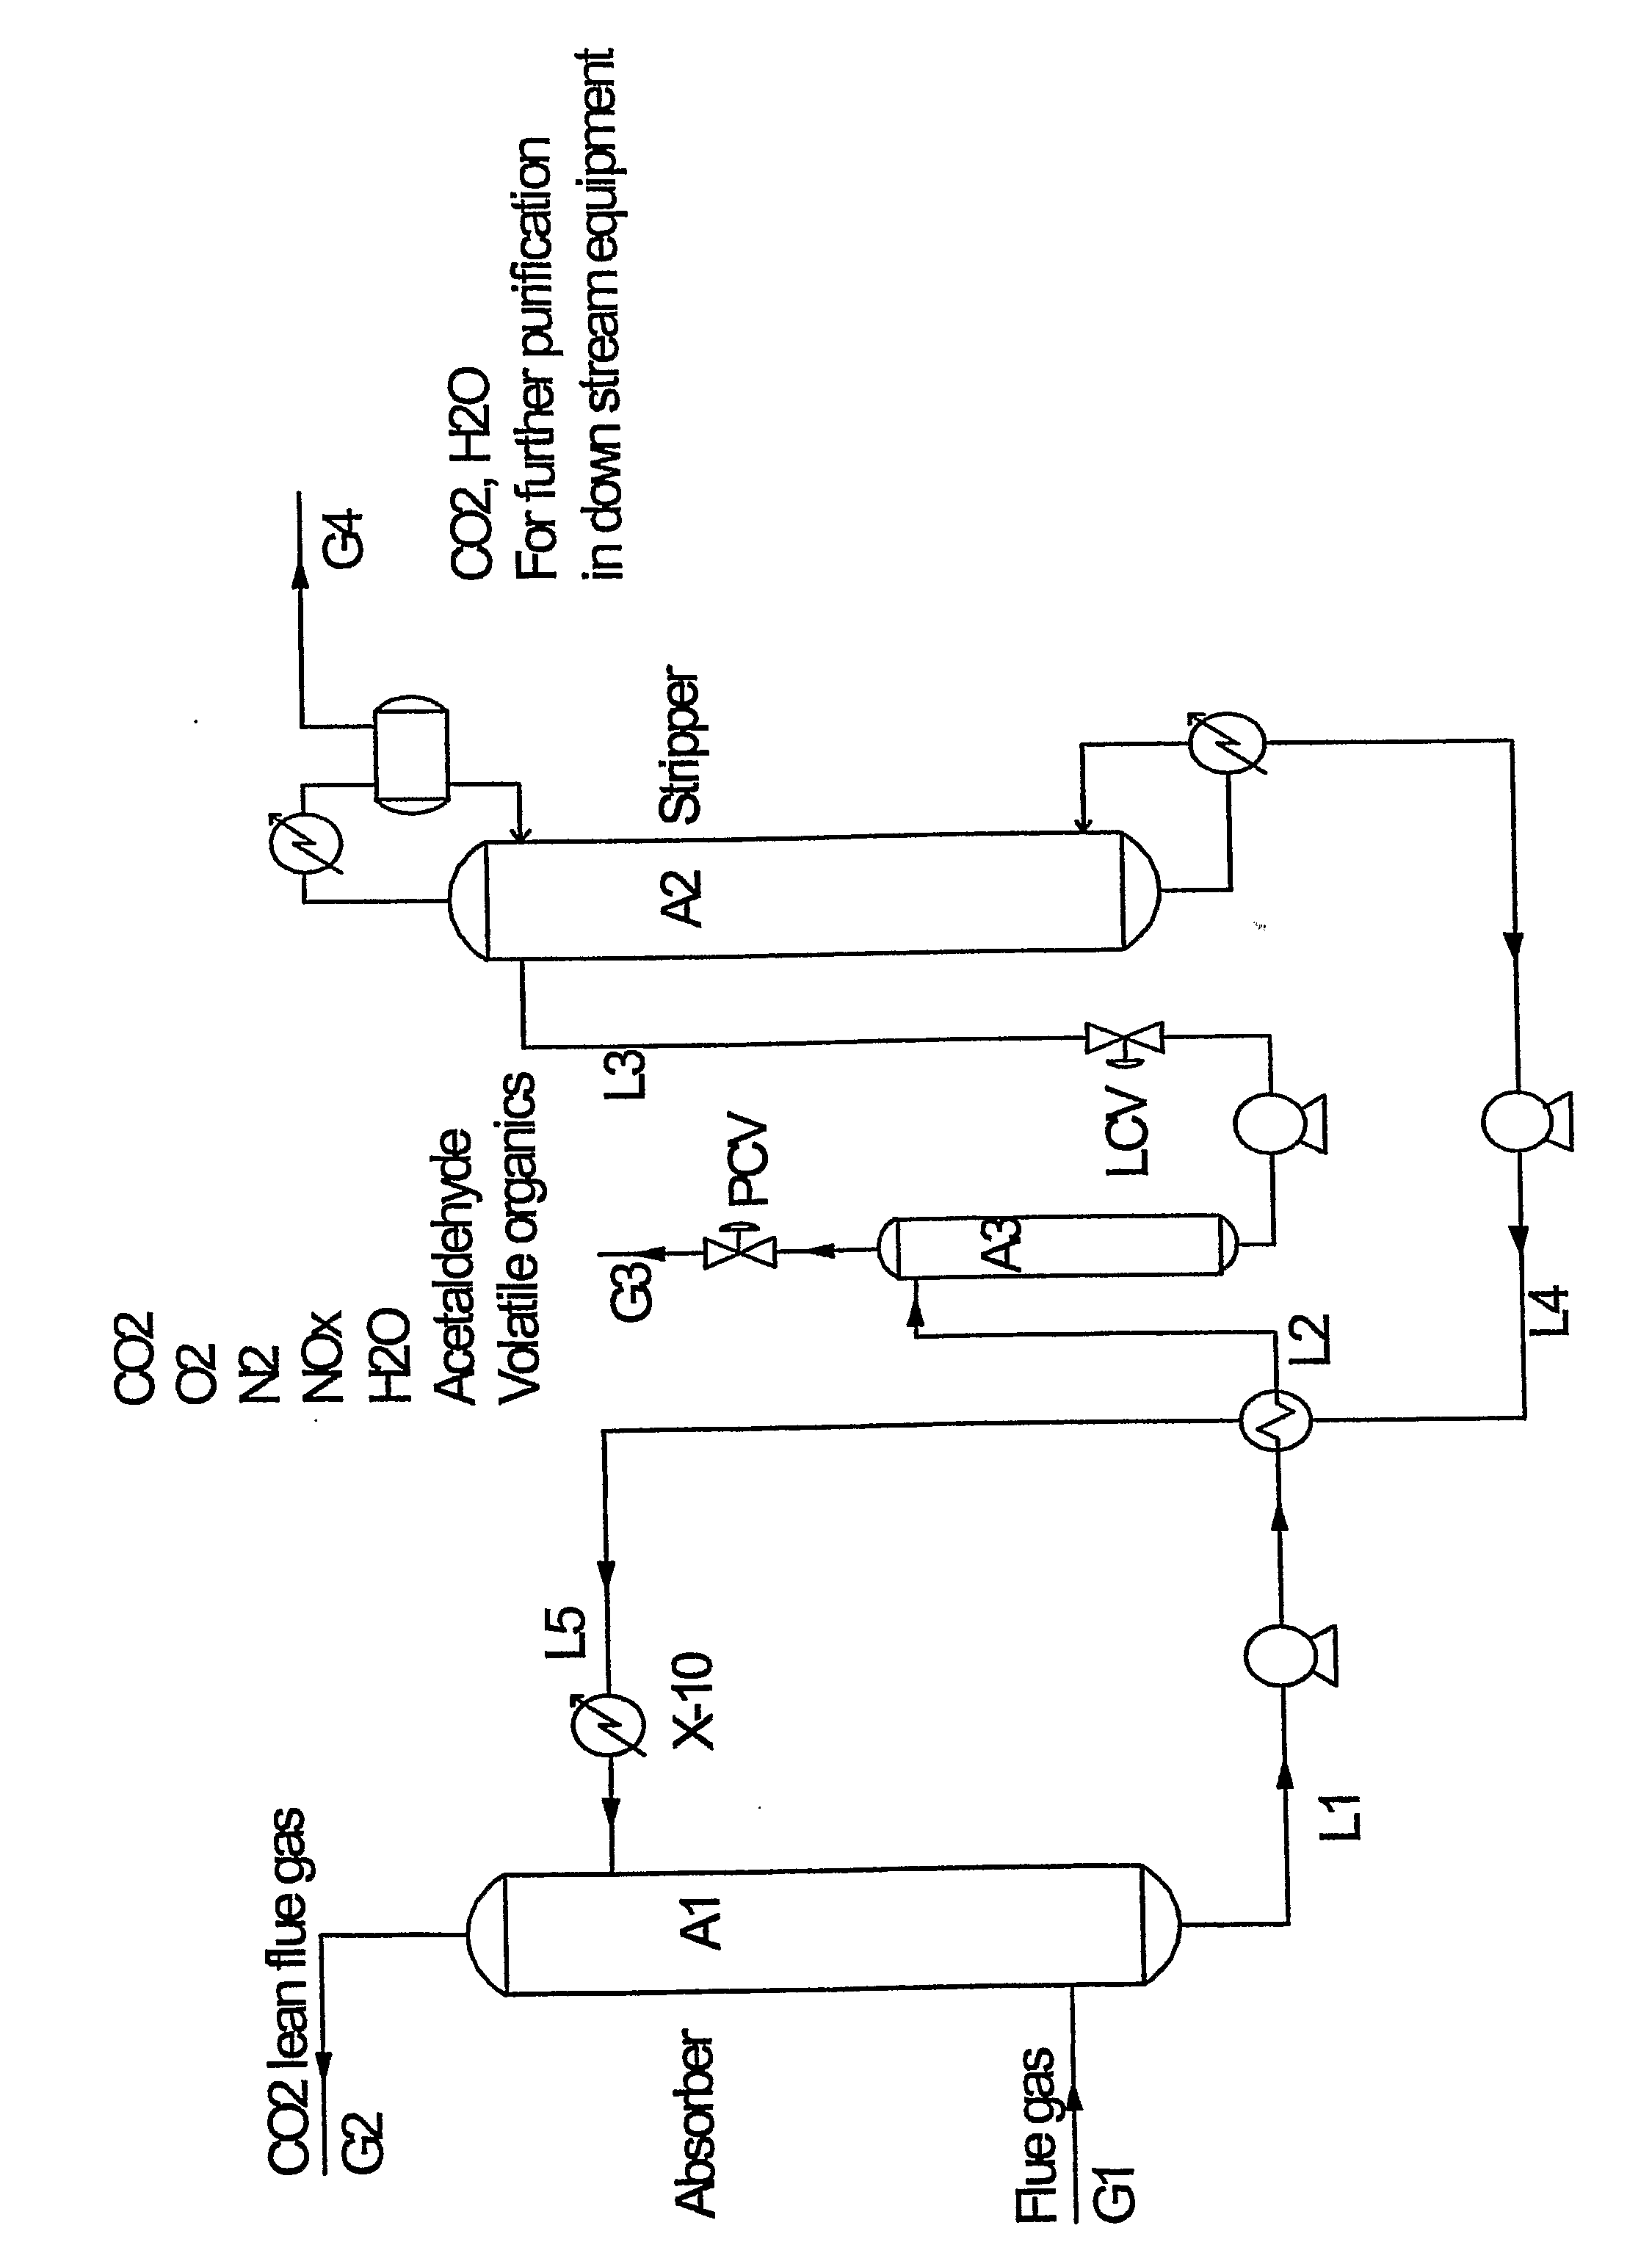 Method for Recovery of High Purity Carbon Dioxide From a Gaseous Source Comprising Nitrogen Compounds